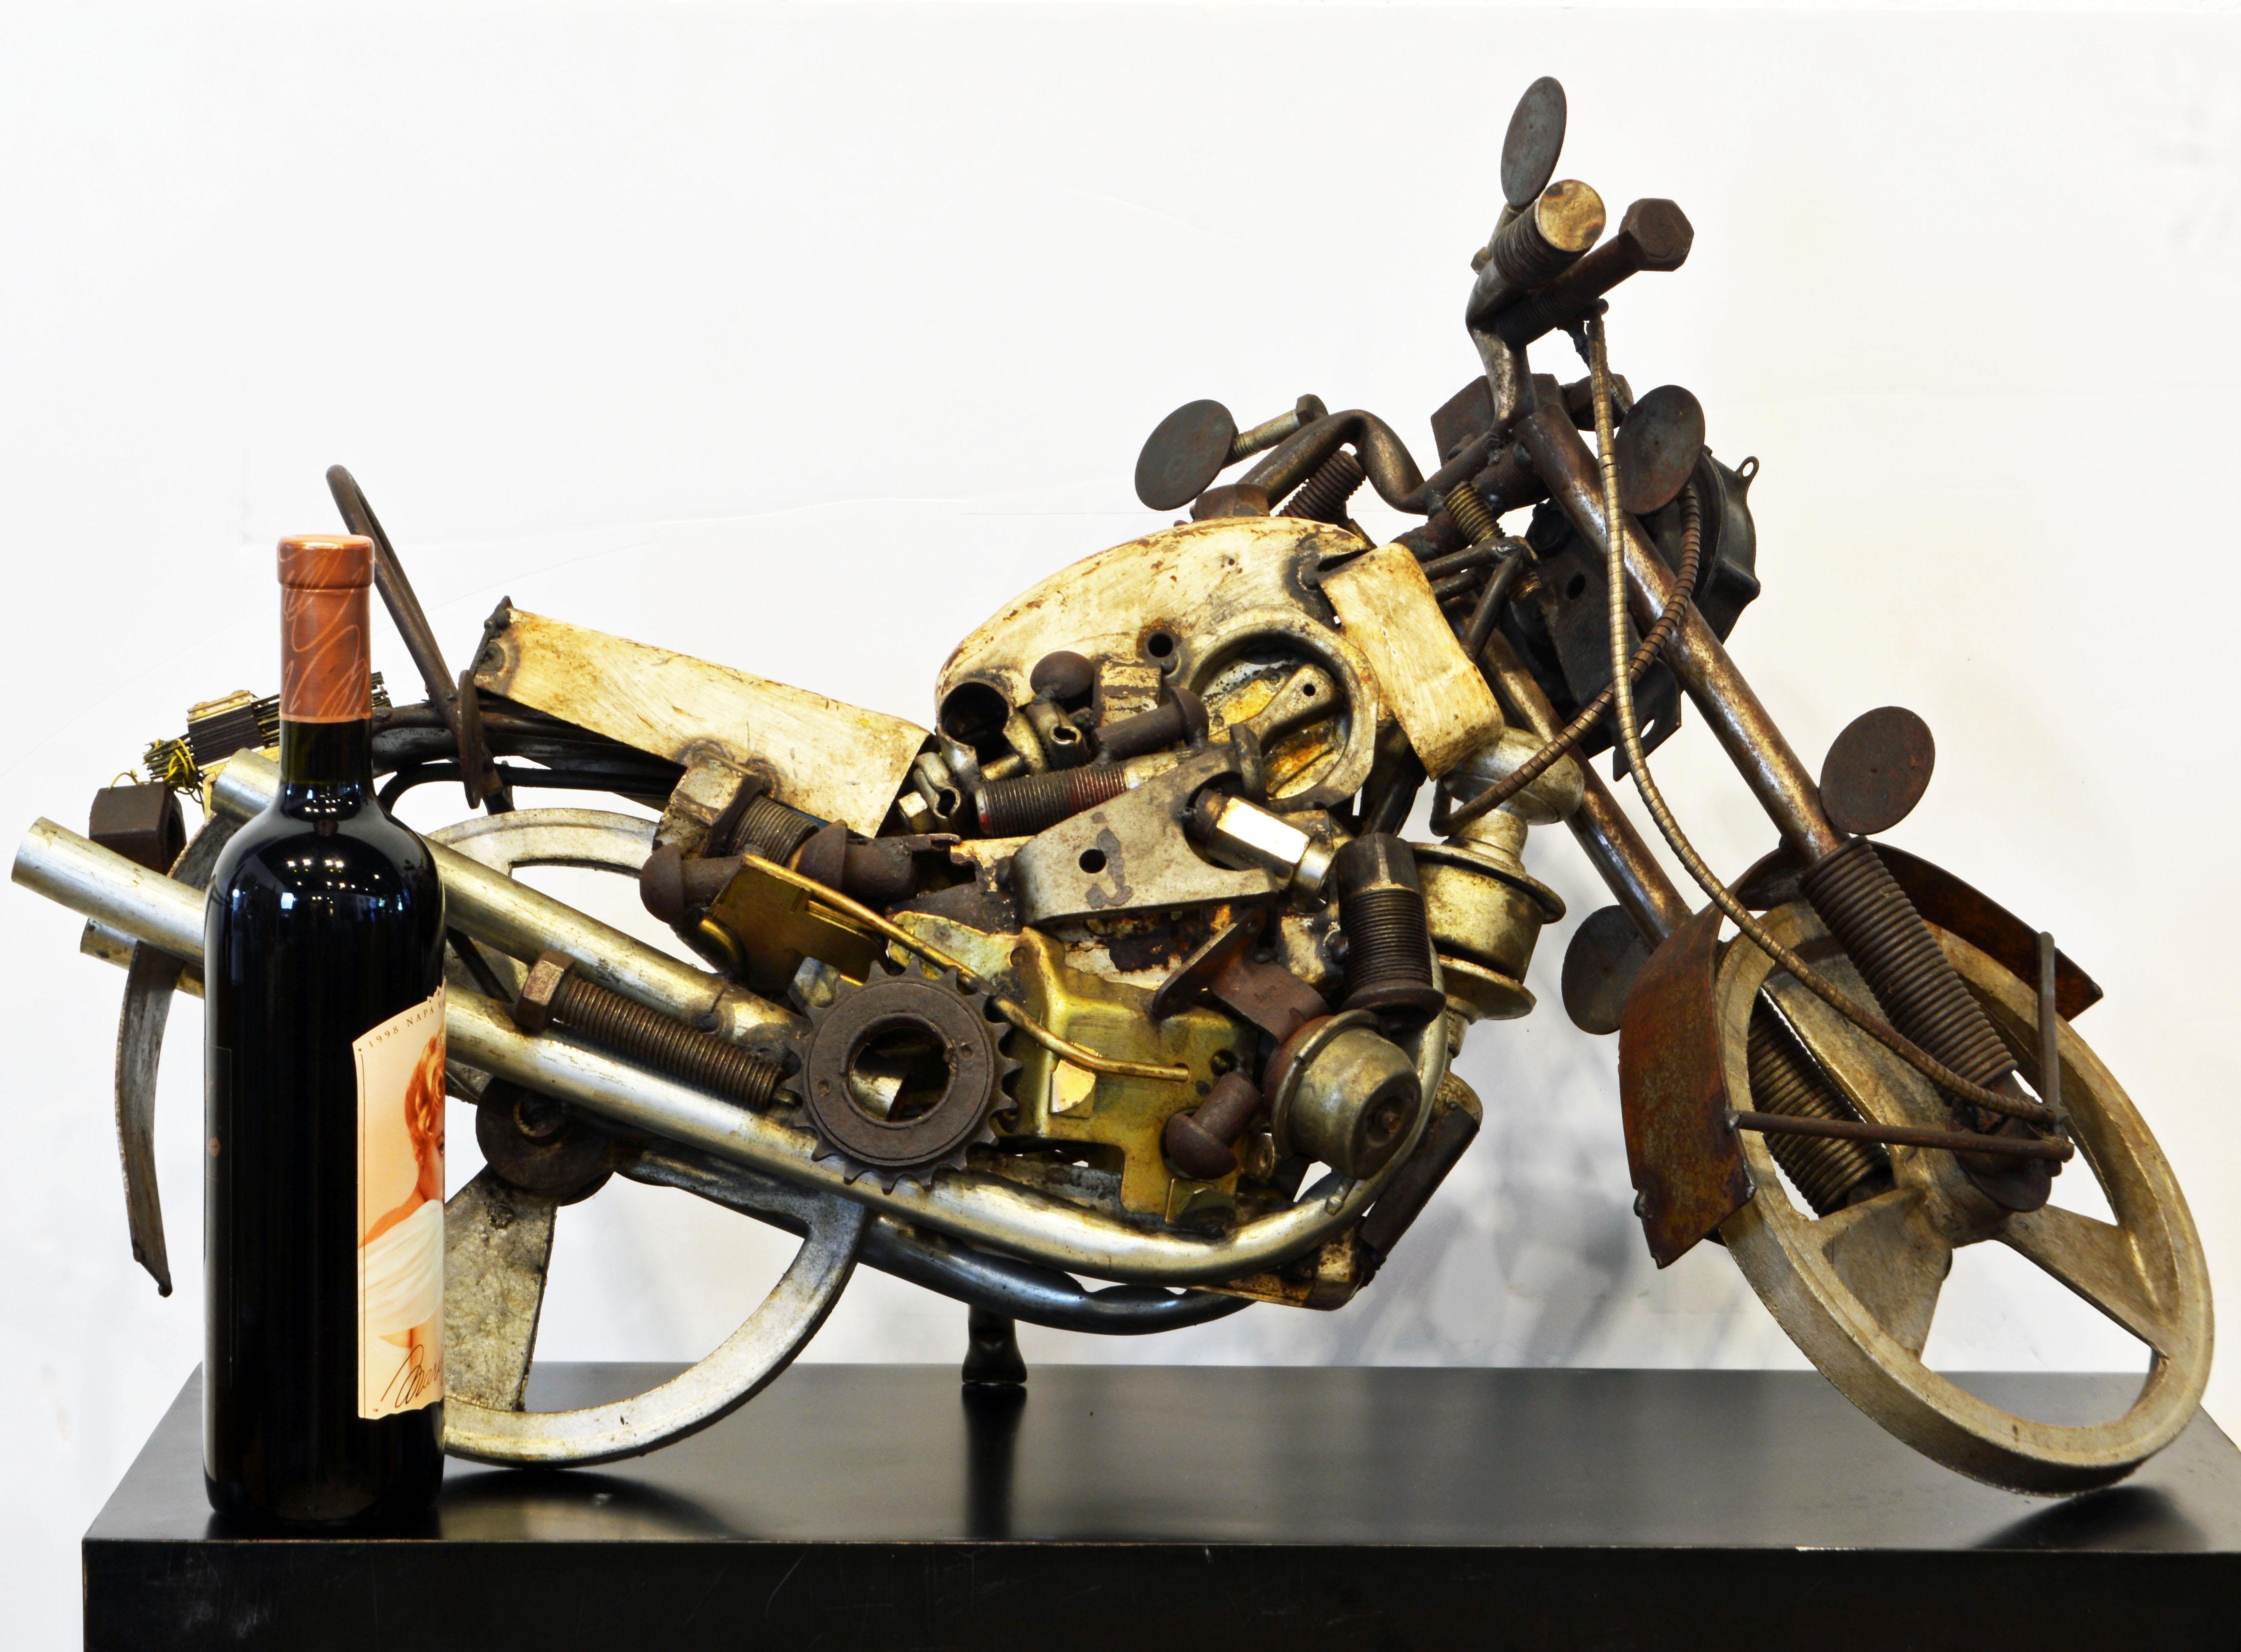 The artist behind this motor cycle sculpture has with great fantasy captured the very essence of a motor bike resting on its kickstand using an array of smaller scrap metal and mechanical parts. Even the front wheel is movable.